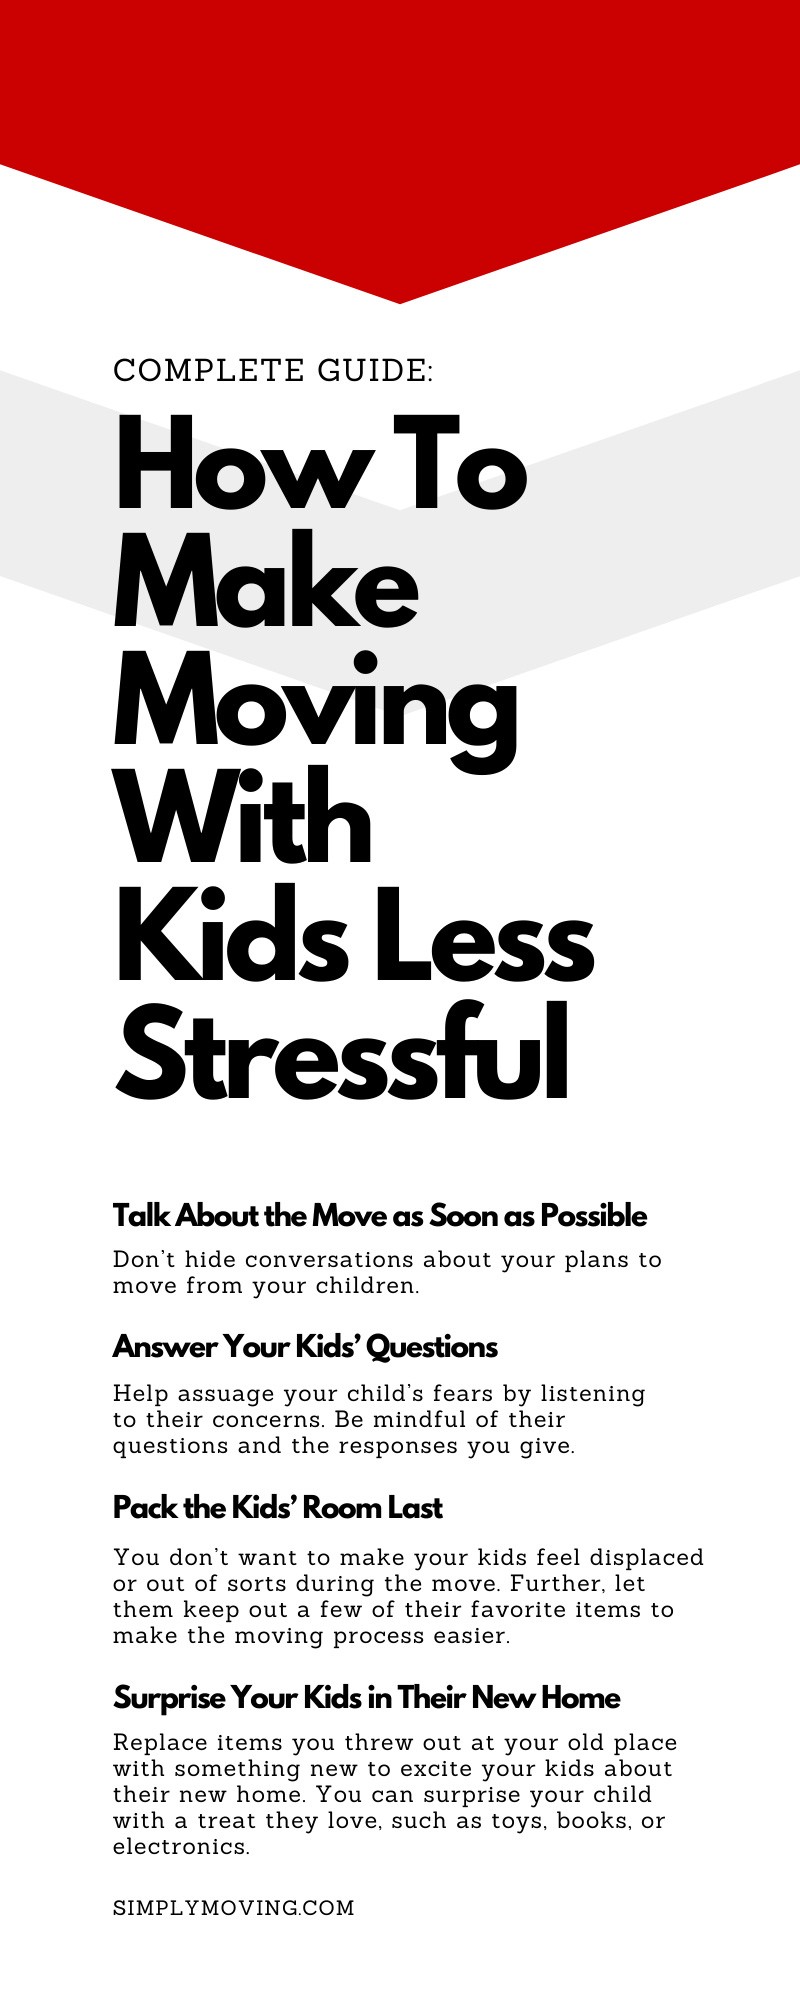 Complete Guide: How To Make Moving With Kids Less Stressful